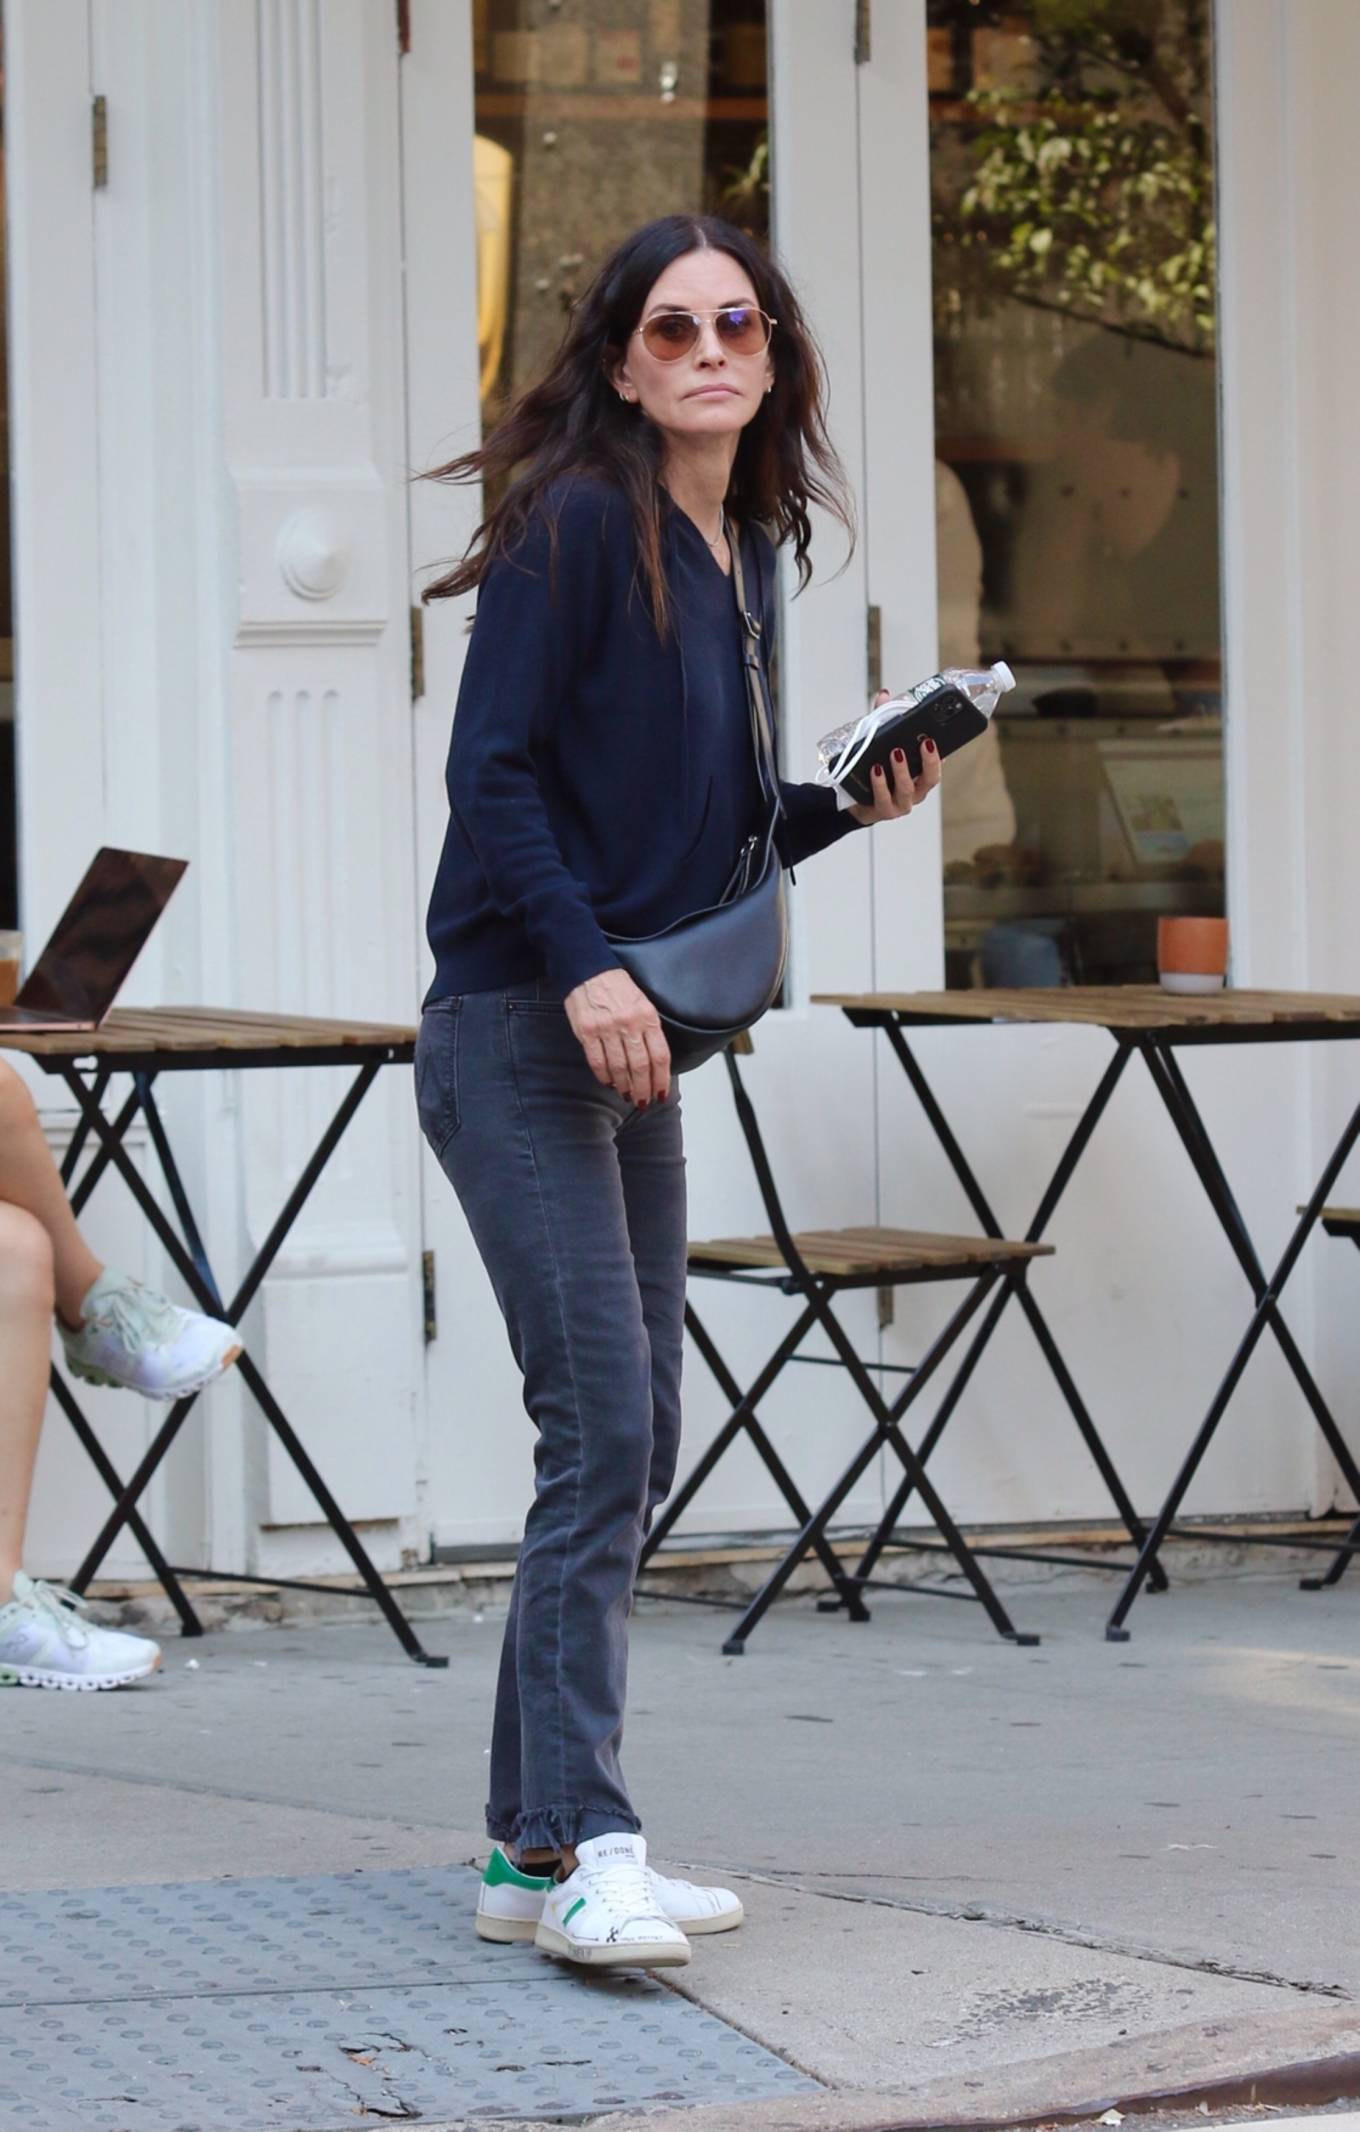 Courteney Cox - Steps out for lunch with friends in New York City